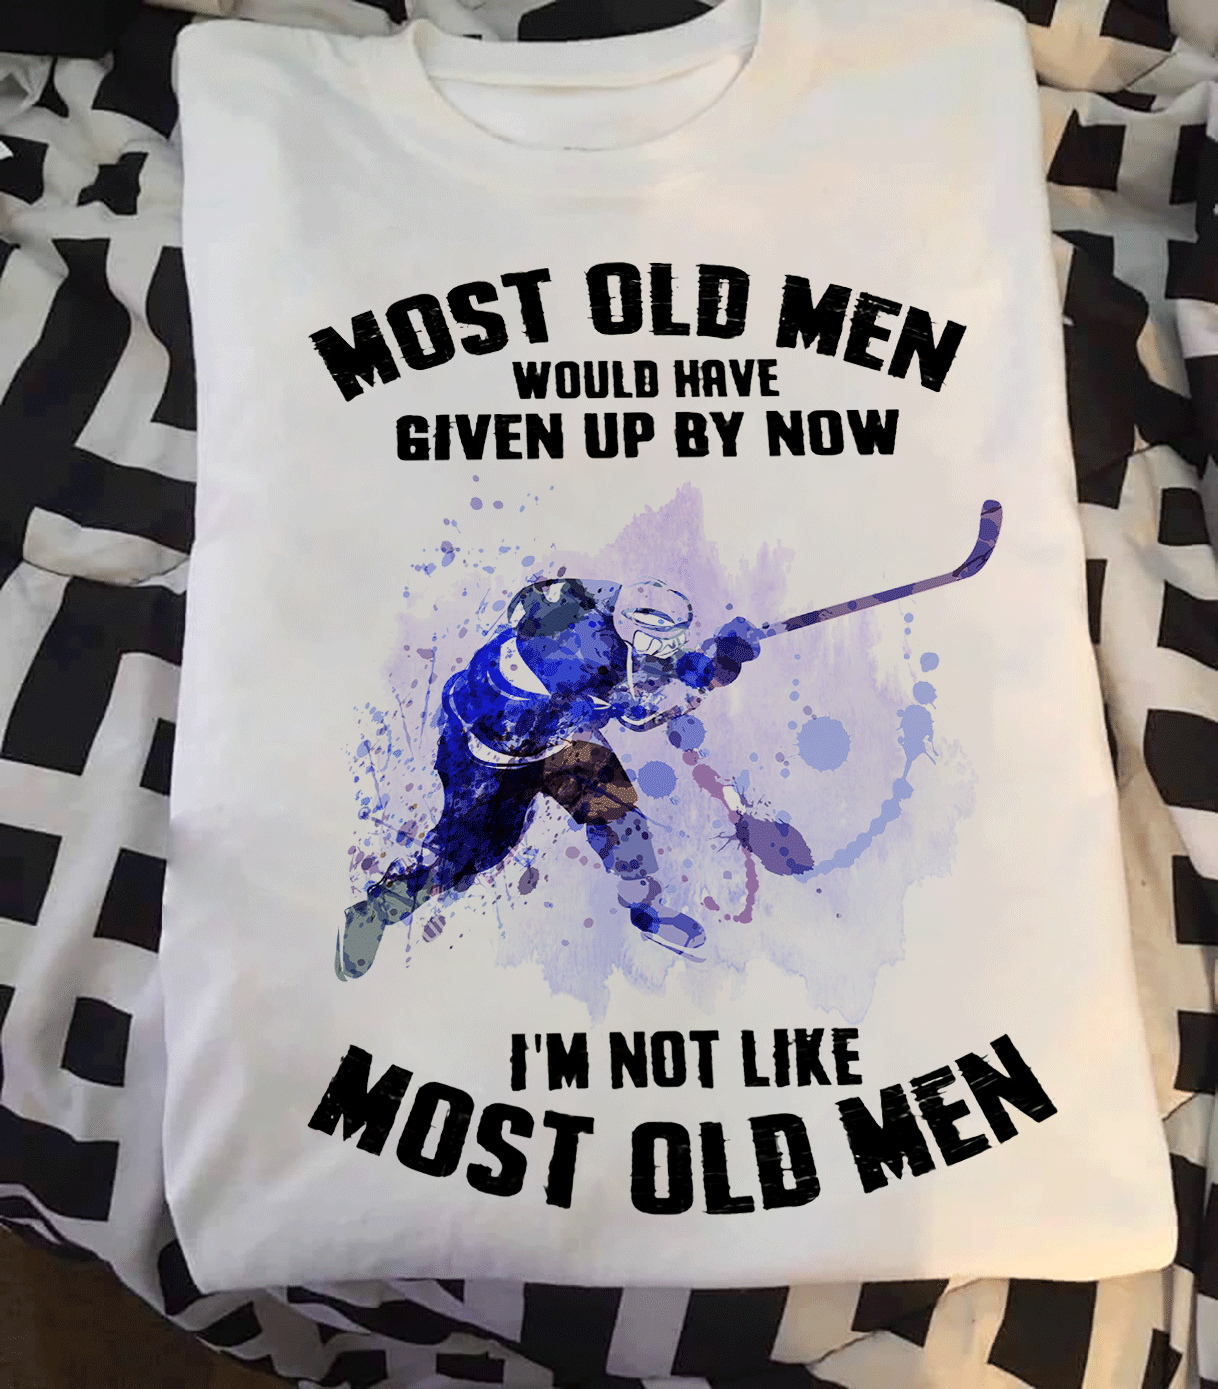 Most old wen would have given up by now I'm not like most old men - Old men love hockey